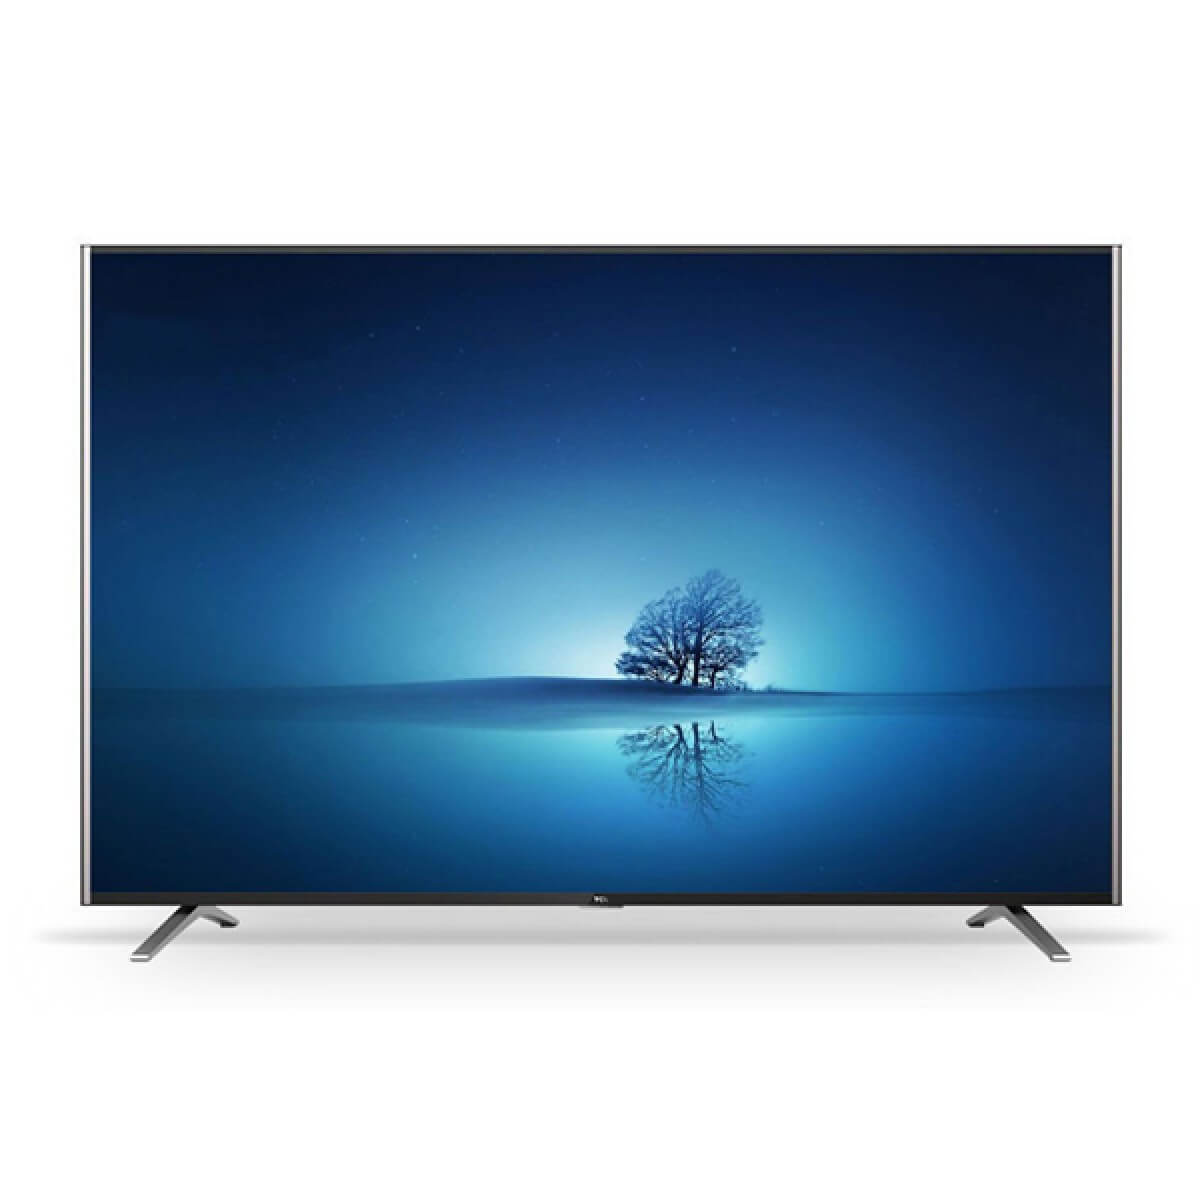 43 inch TCL LED Smart TV TCL Televisions Reapp Ghana